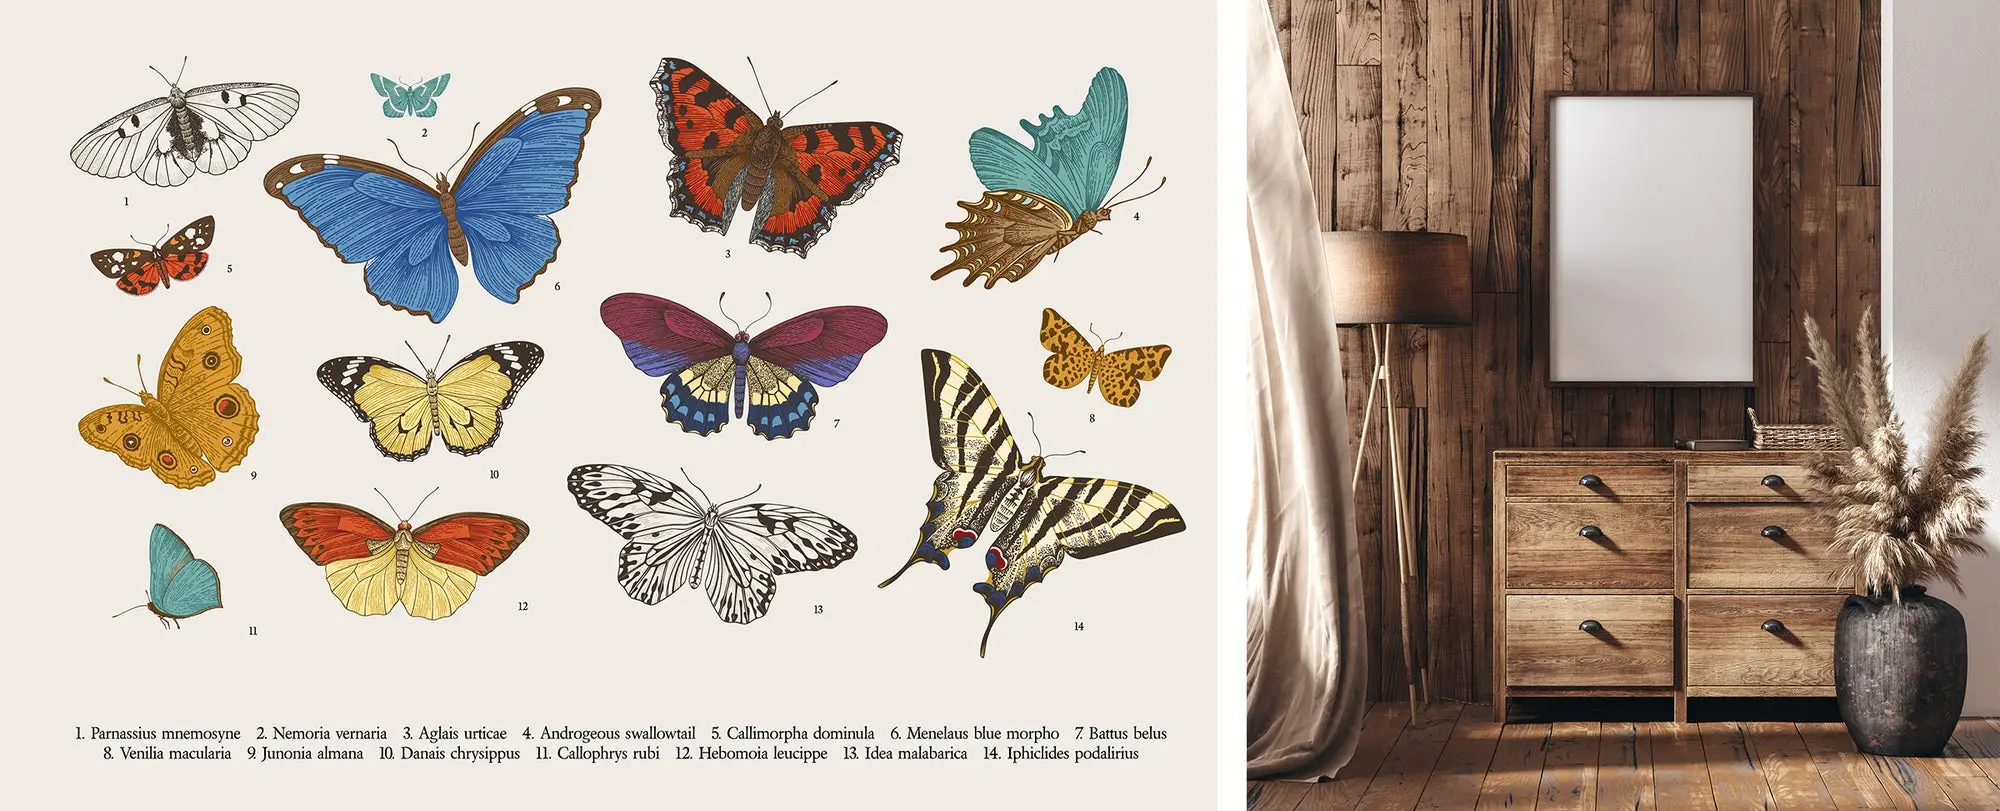 Labeled scientific illustration of butterlies next to 3D render of lamp, frame, and nightstand against a wooden wall. 